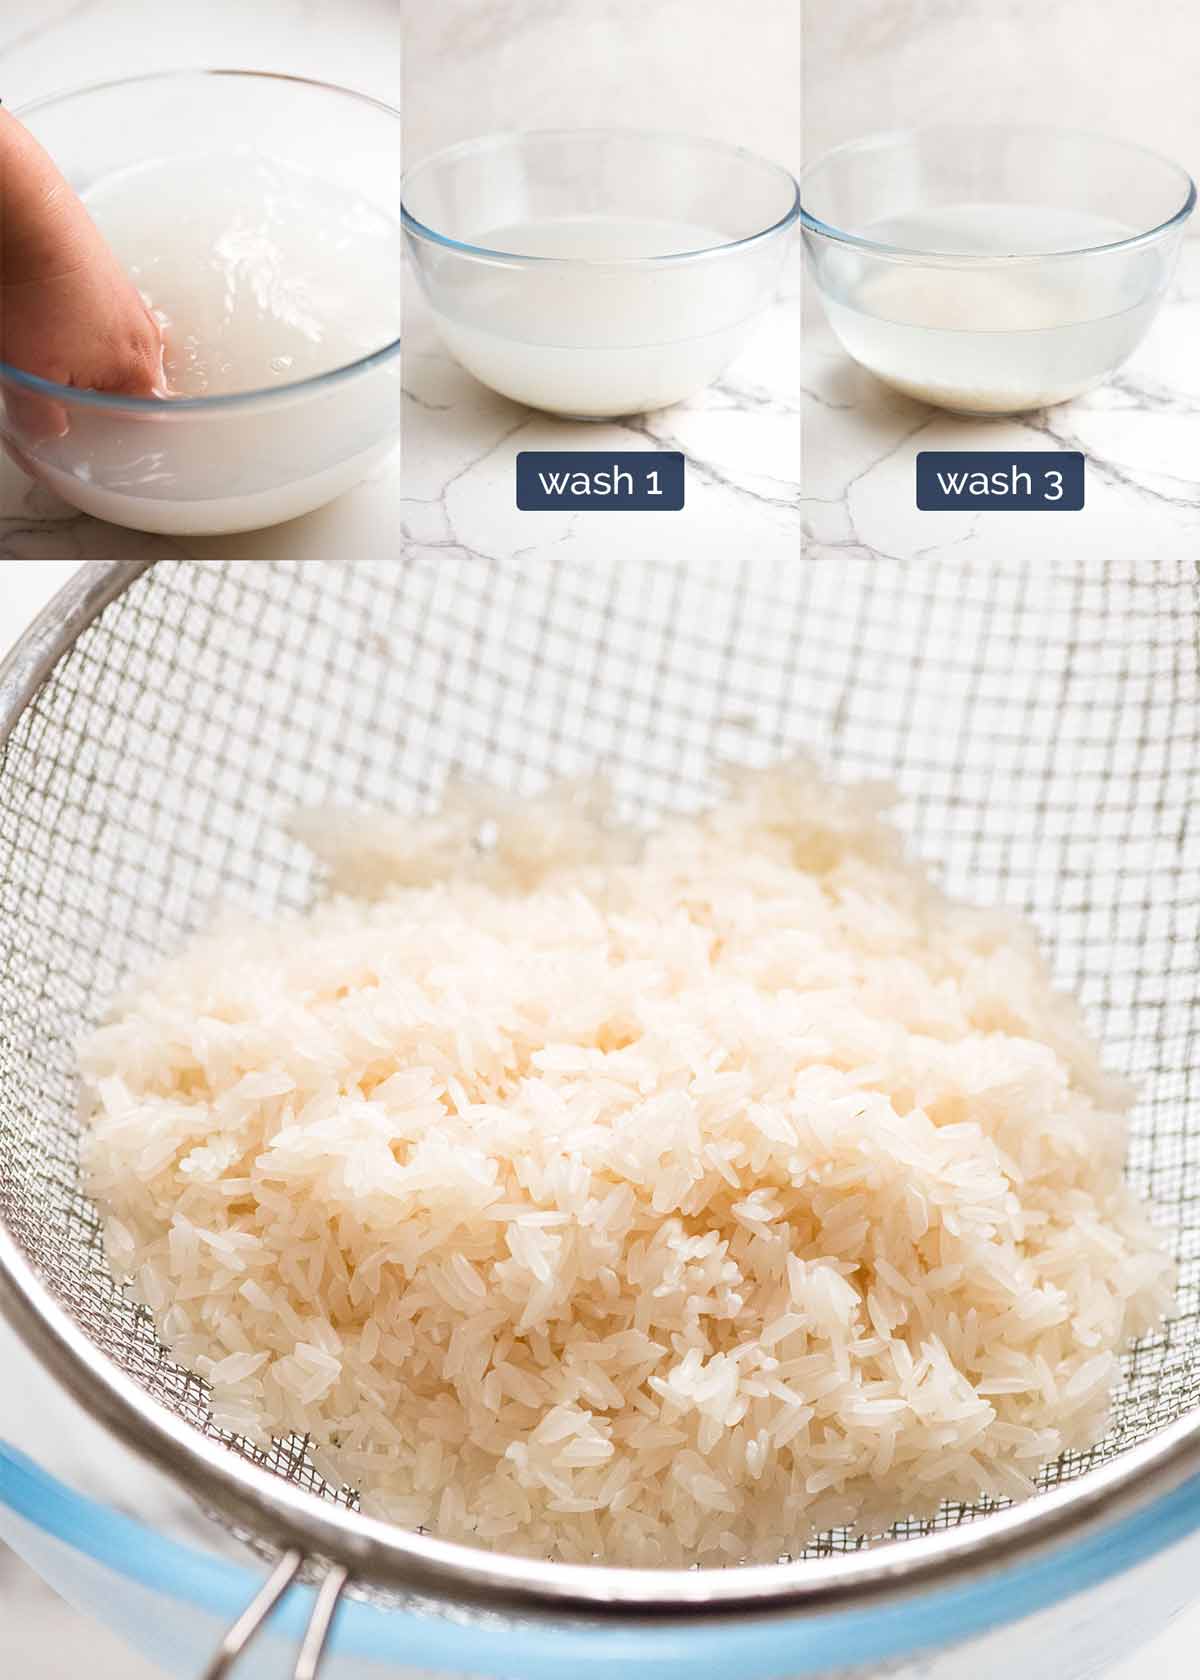 How Much Rice Does 1 2 Cup Make? 